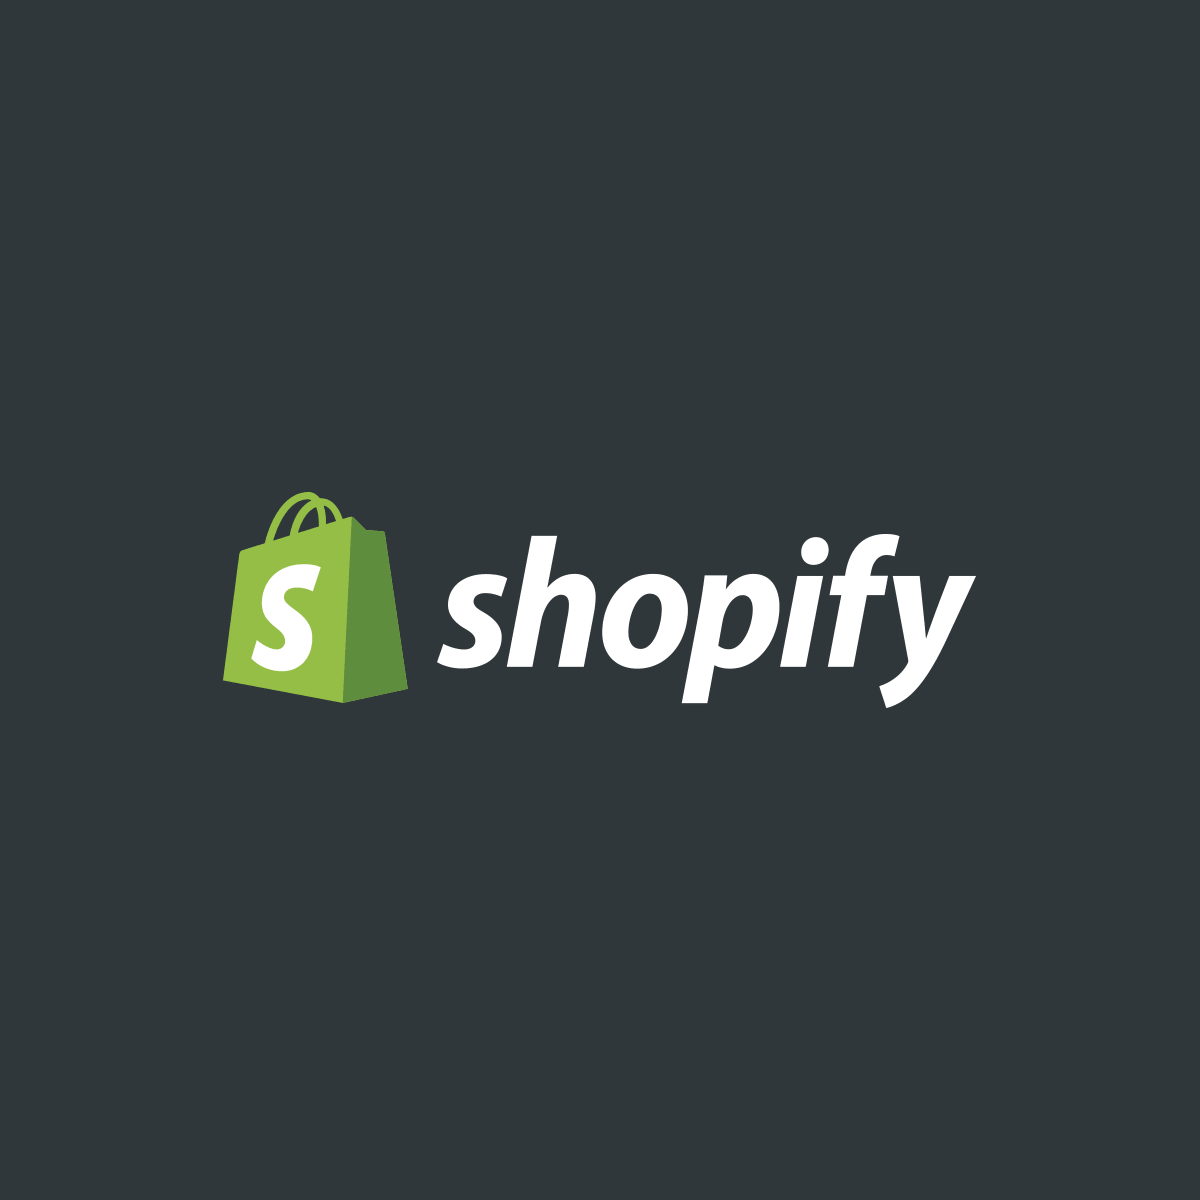 Shopify: Is The Long-Term Story Intact? - Shopify Inc. (NYSE:SHOP